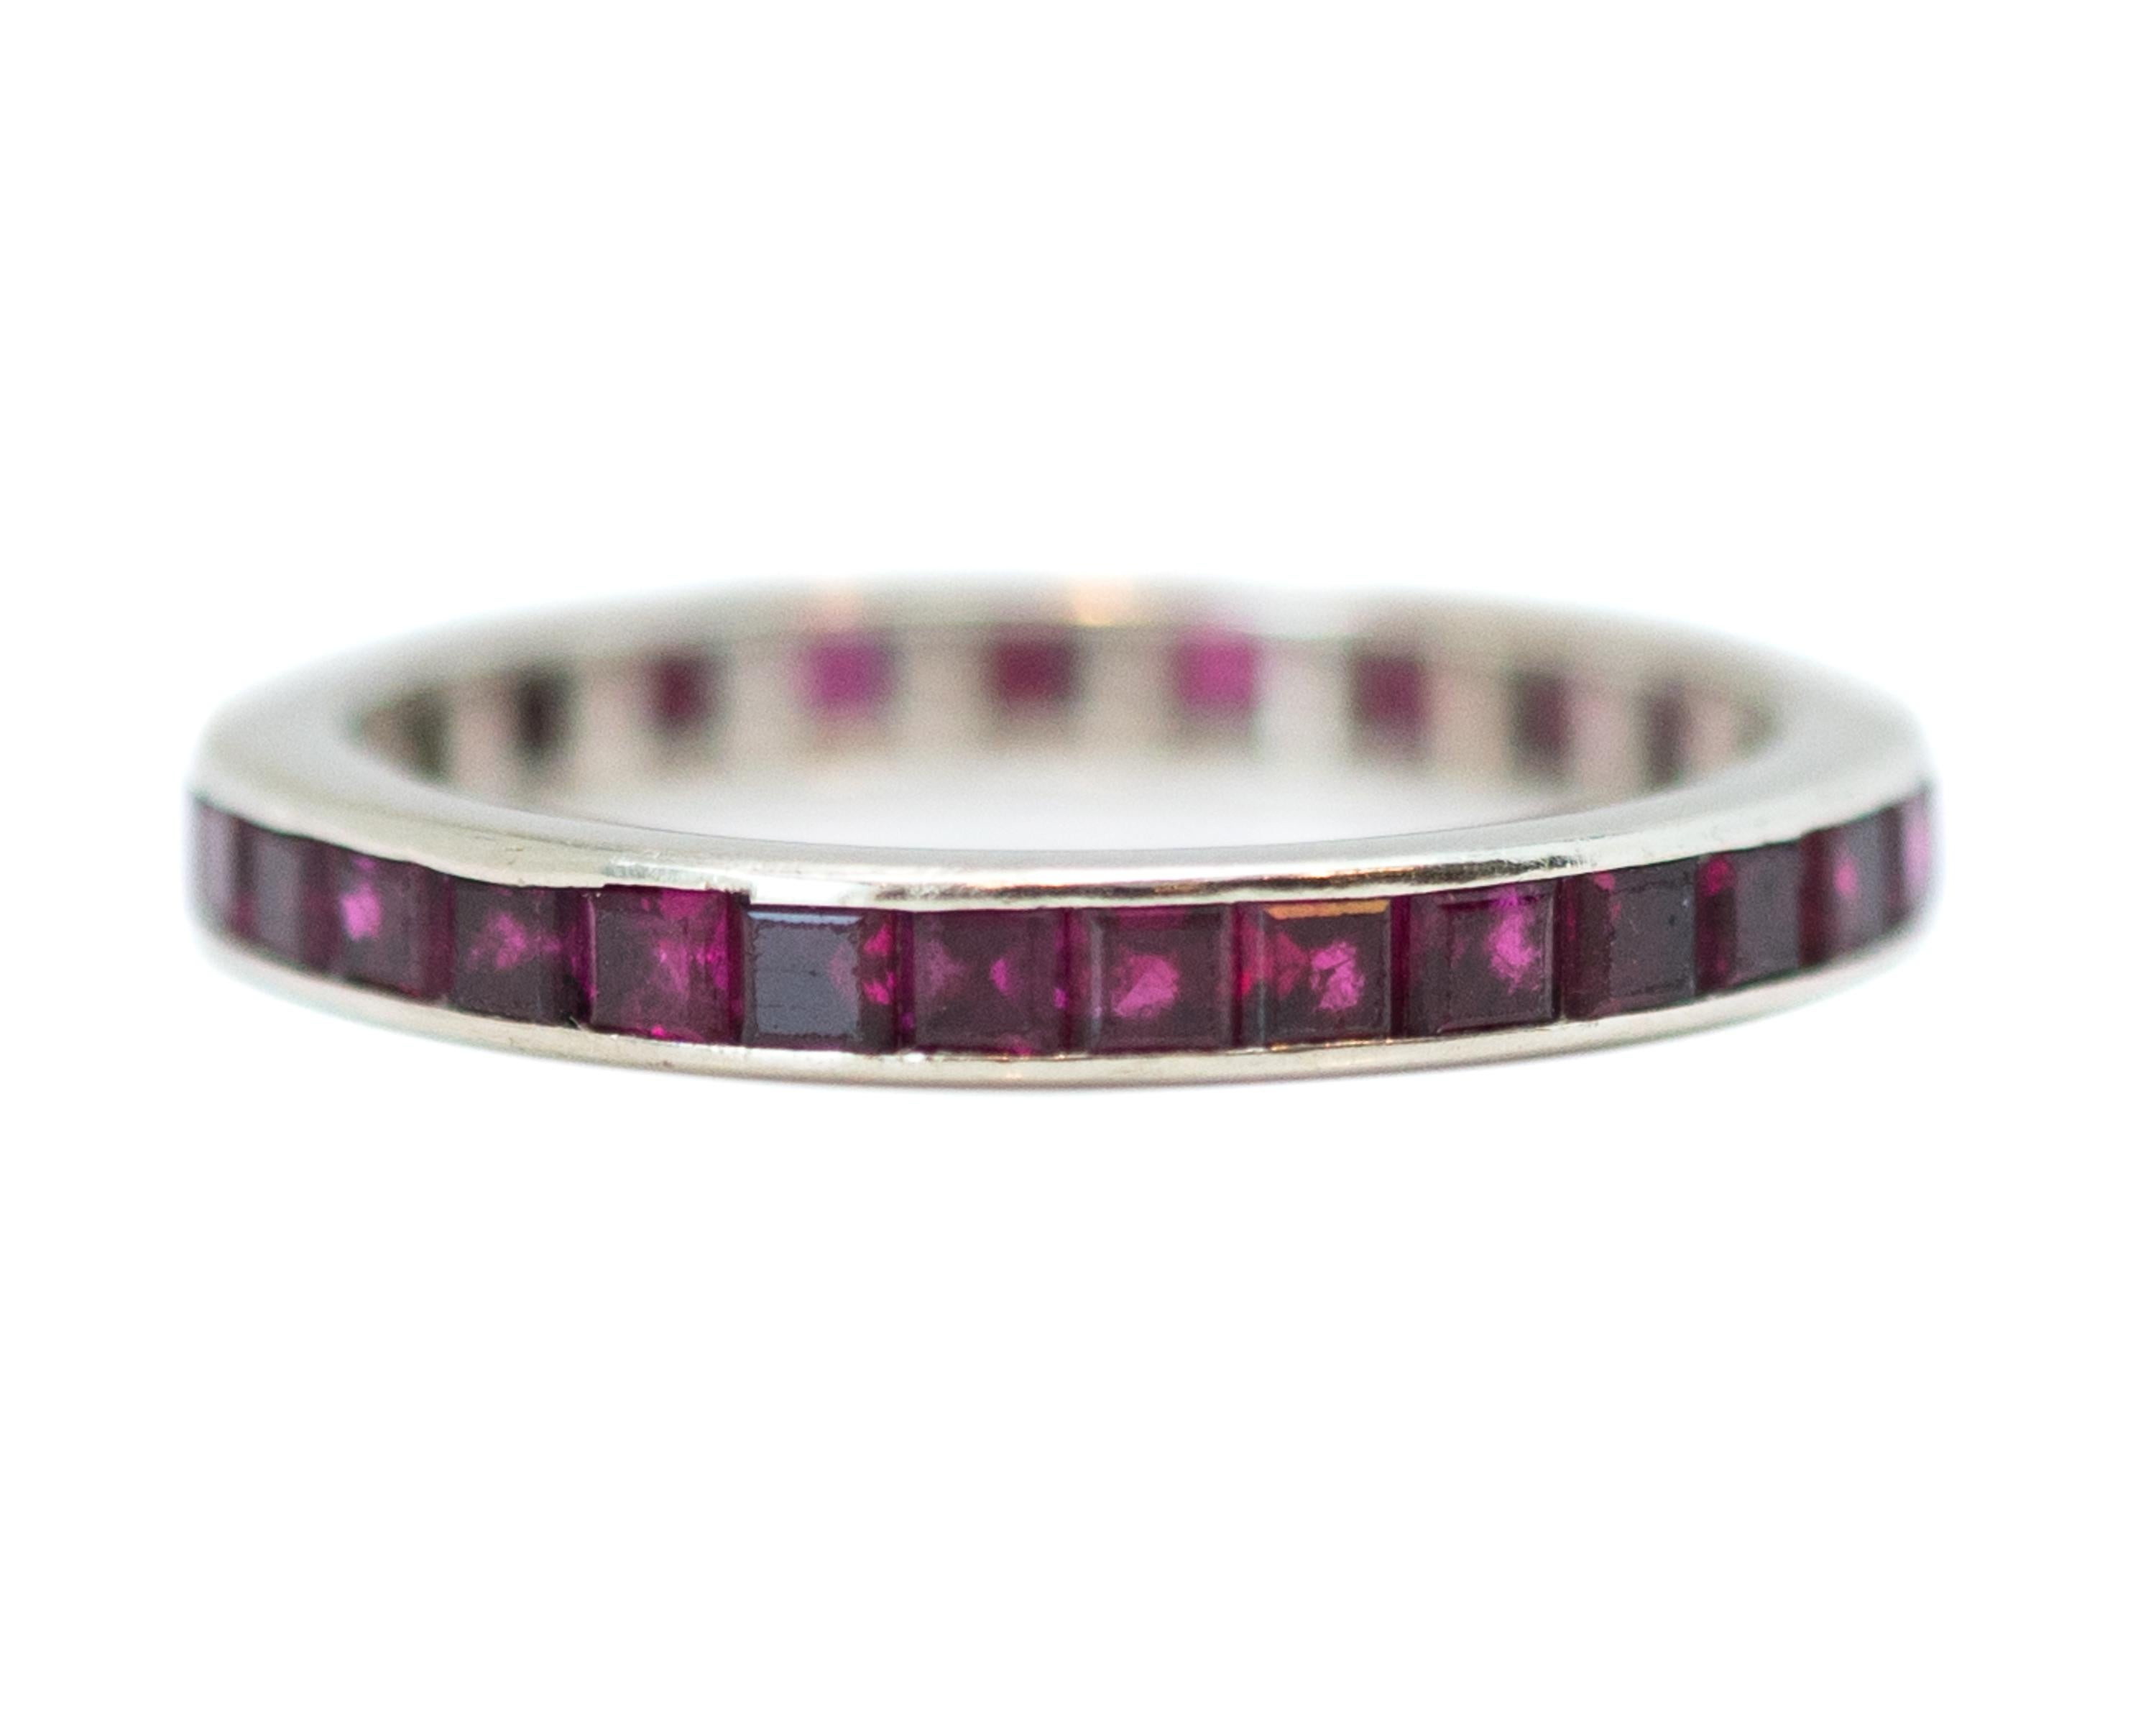 1950s Retro Ruby Eternity Band - 14 Karat White Gold, Rubies

Features:
Emerald cut Rubies 
14 Karat White Gold Setting
Channel set Stones
Deep pinkish red Rubies

2.5 millimeters wide
Finger to top of stone measures 2.0 millimeters
Fits size 6 1/4